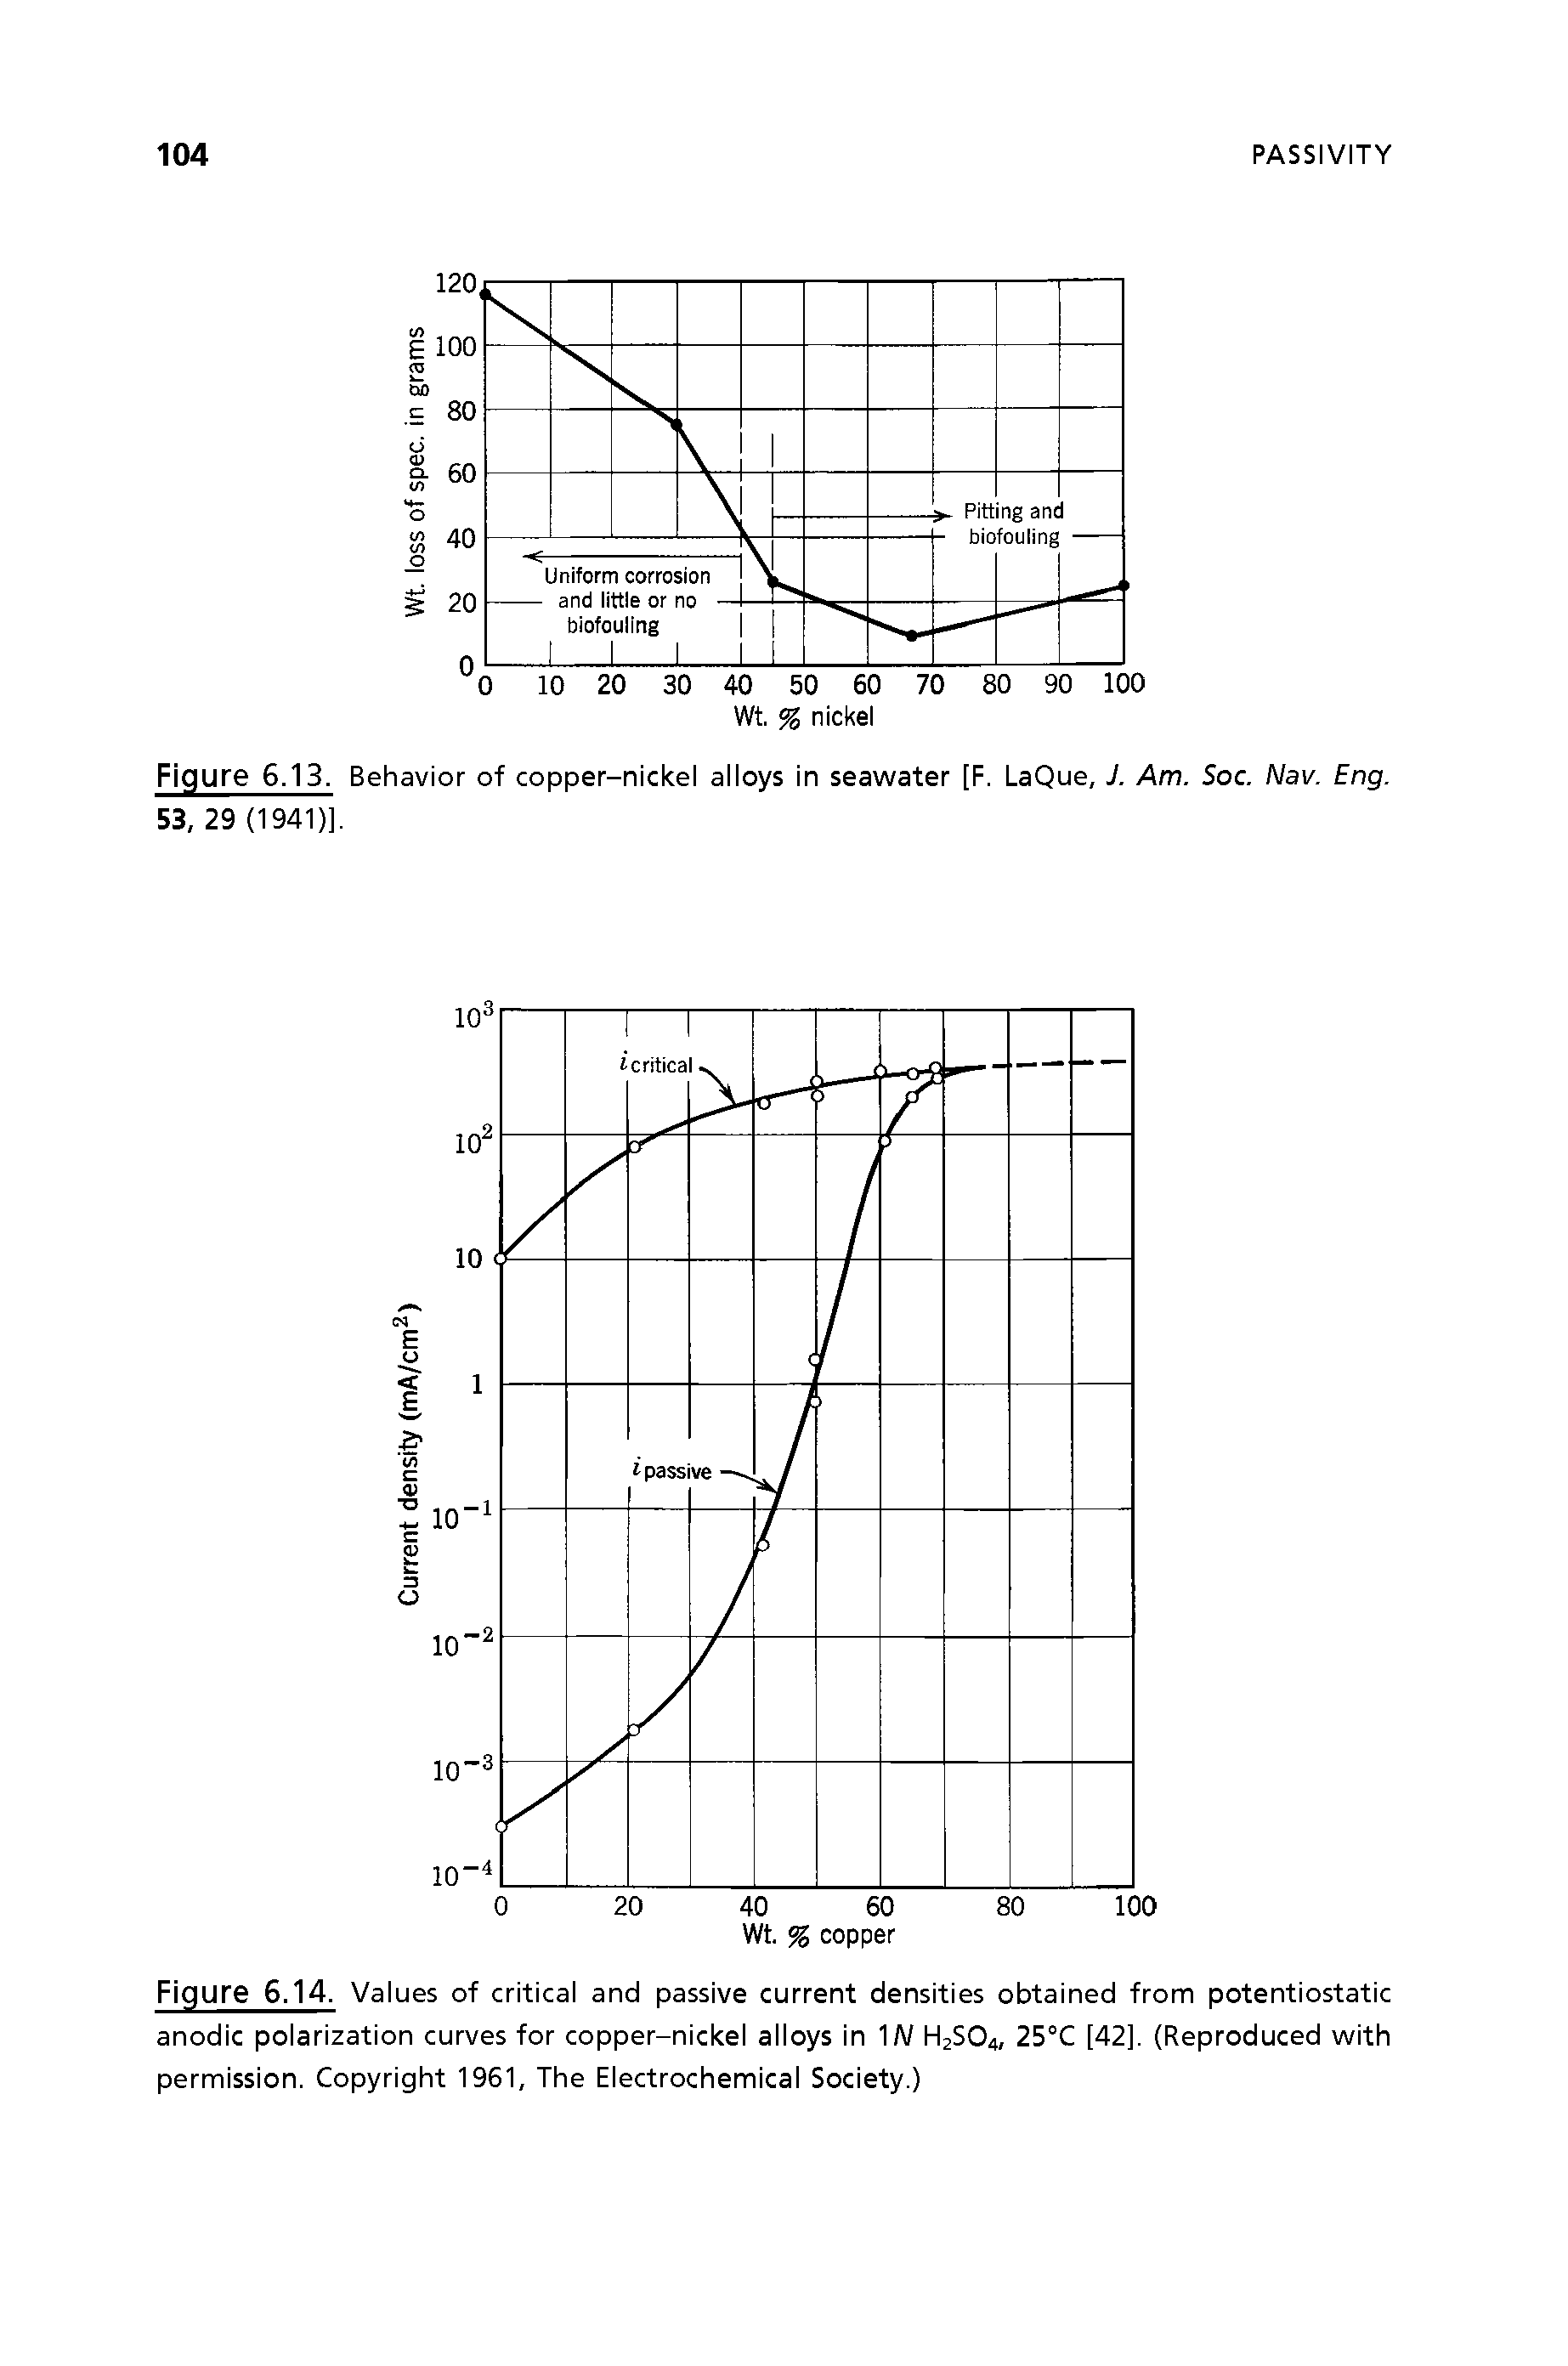 Figure 6.14. Values of critical and passive current densities obtained from potentiostatic anodic polarization curves for copper-nickel alloys in N H2SO4, 25°C [42]. (Reproduced with permission. Copyright 1961, The Electrochemical Society.)...